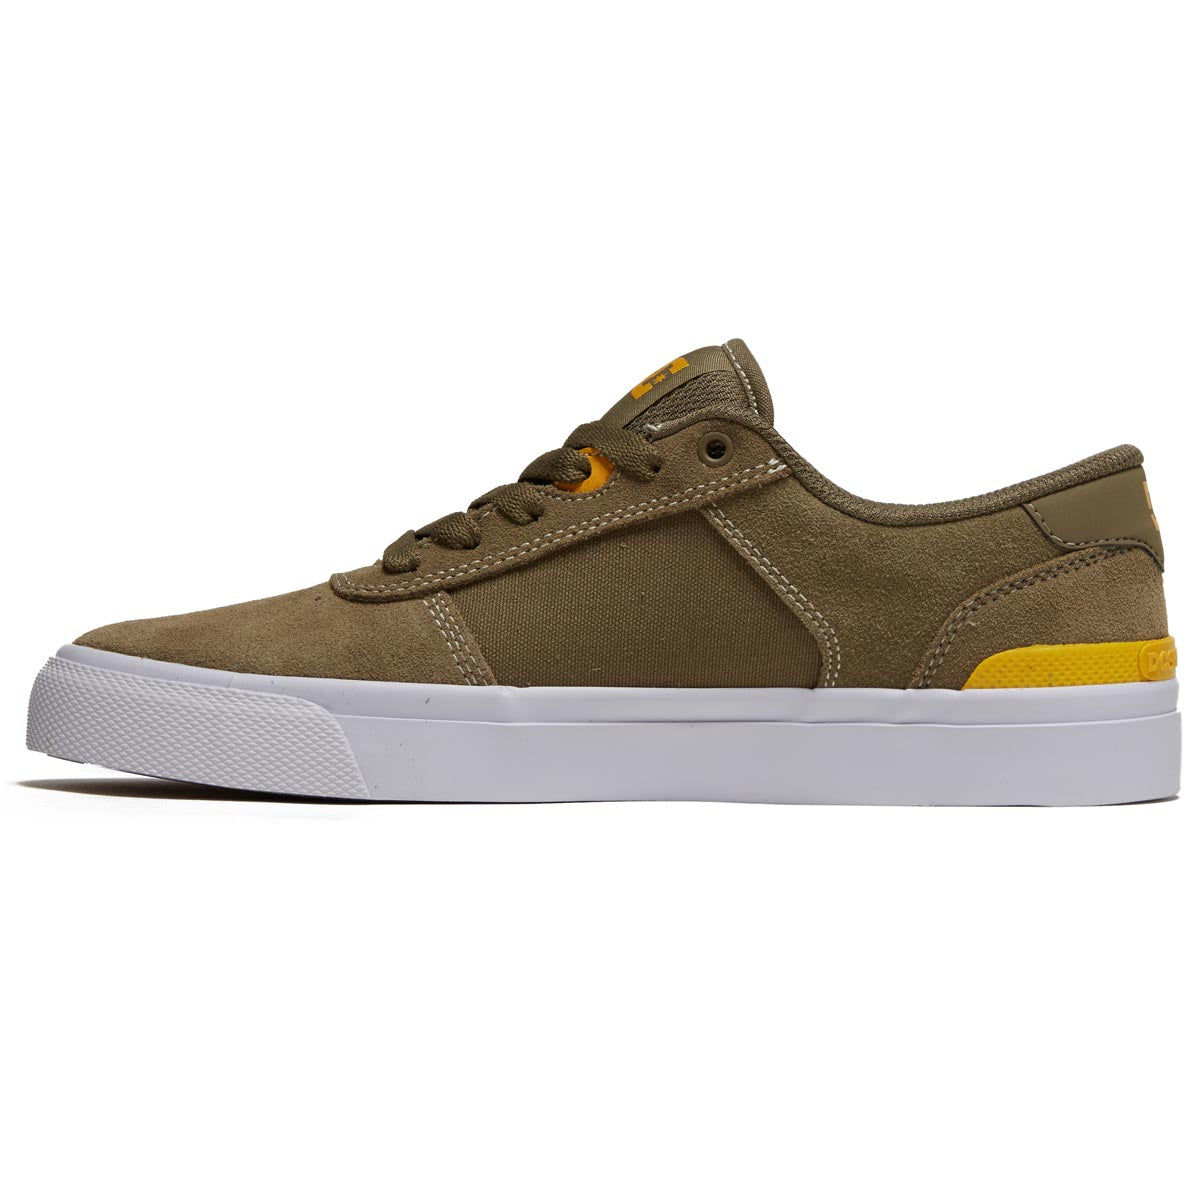 DC Teknic S Shoes - Army/Olive image 2